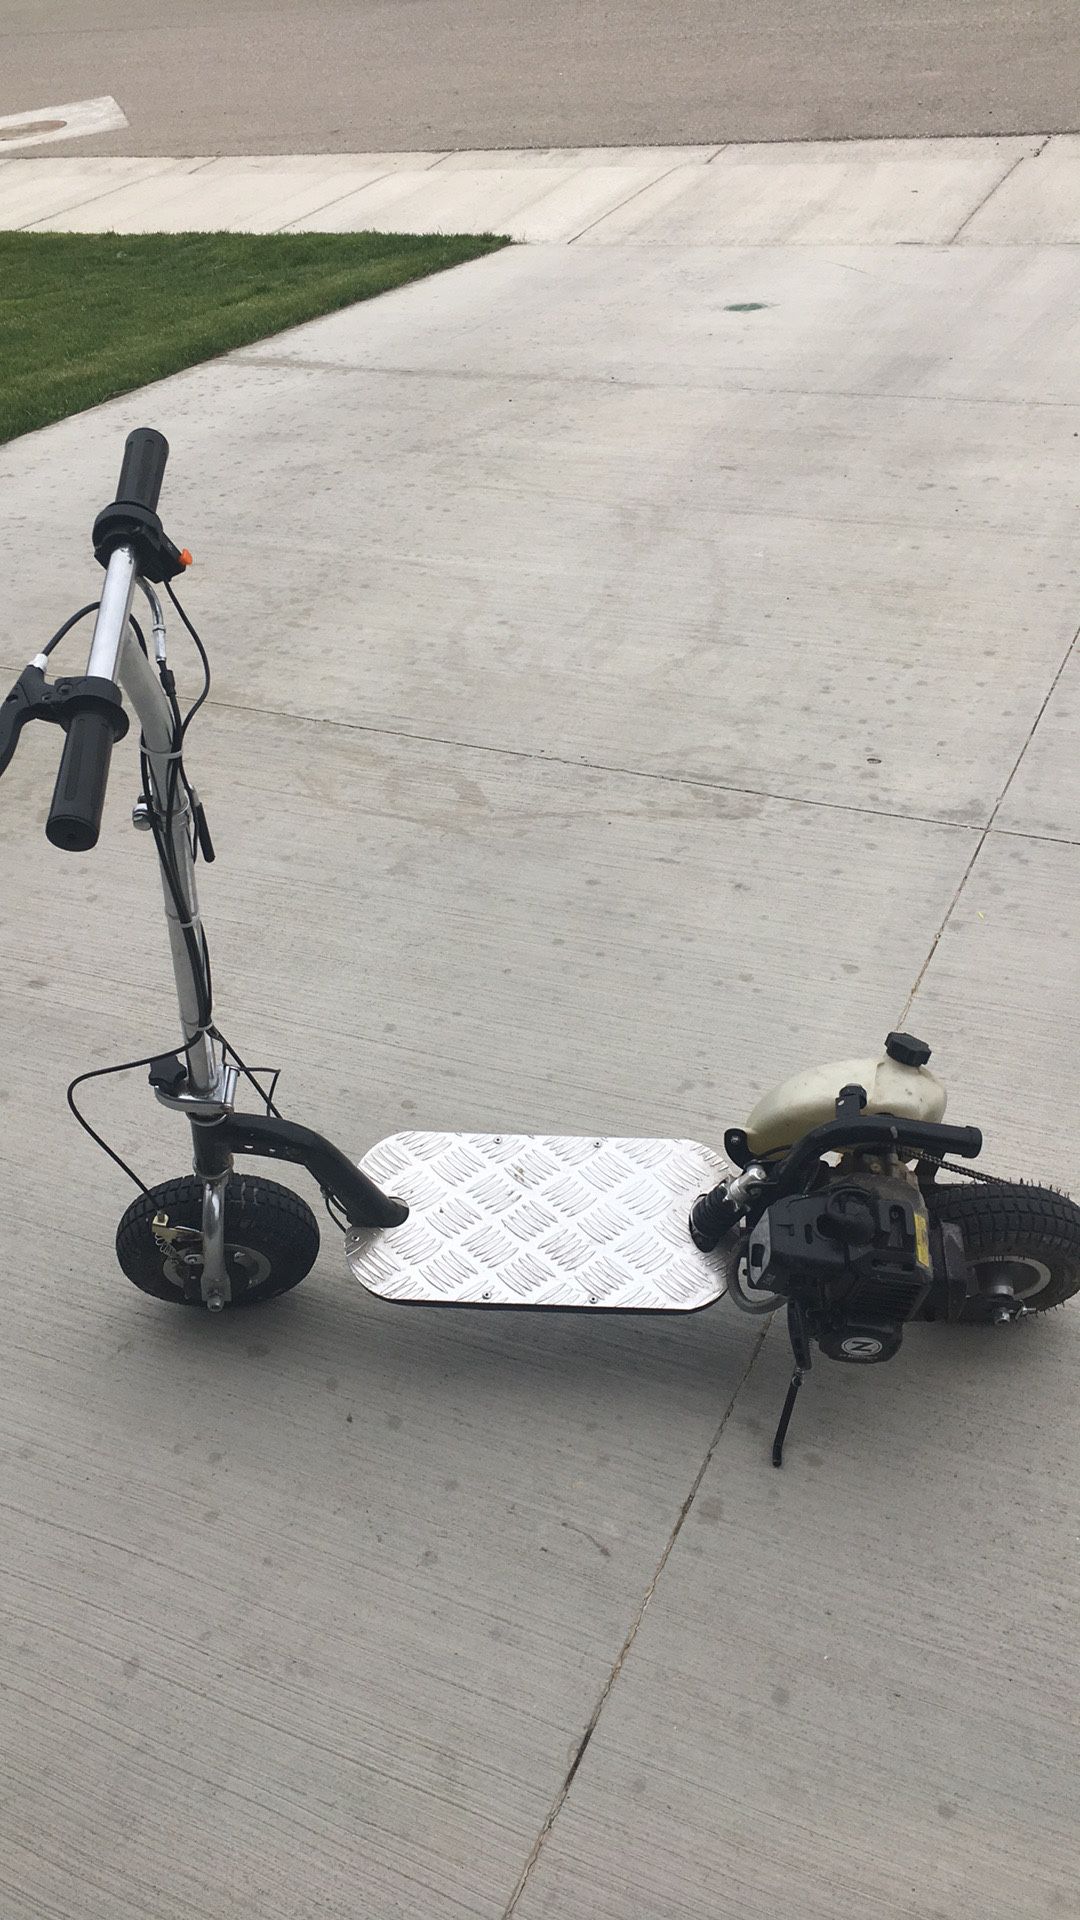 1999 Zooma scooter 33cc